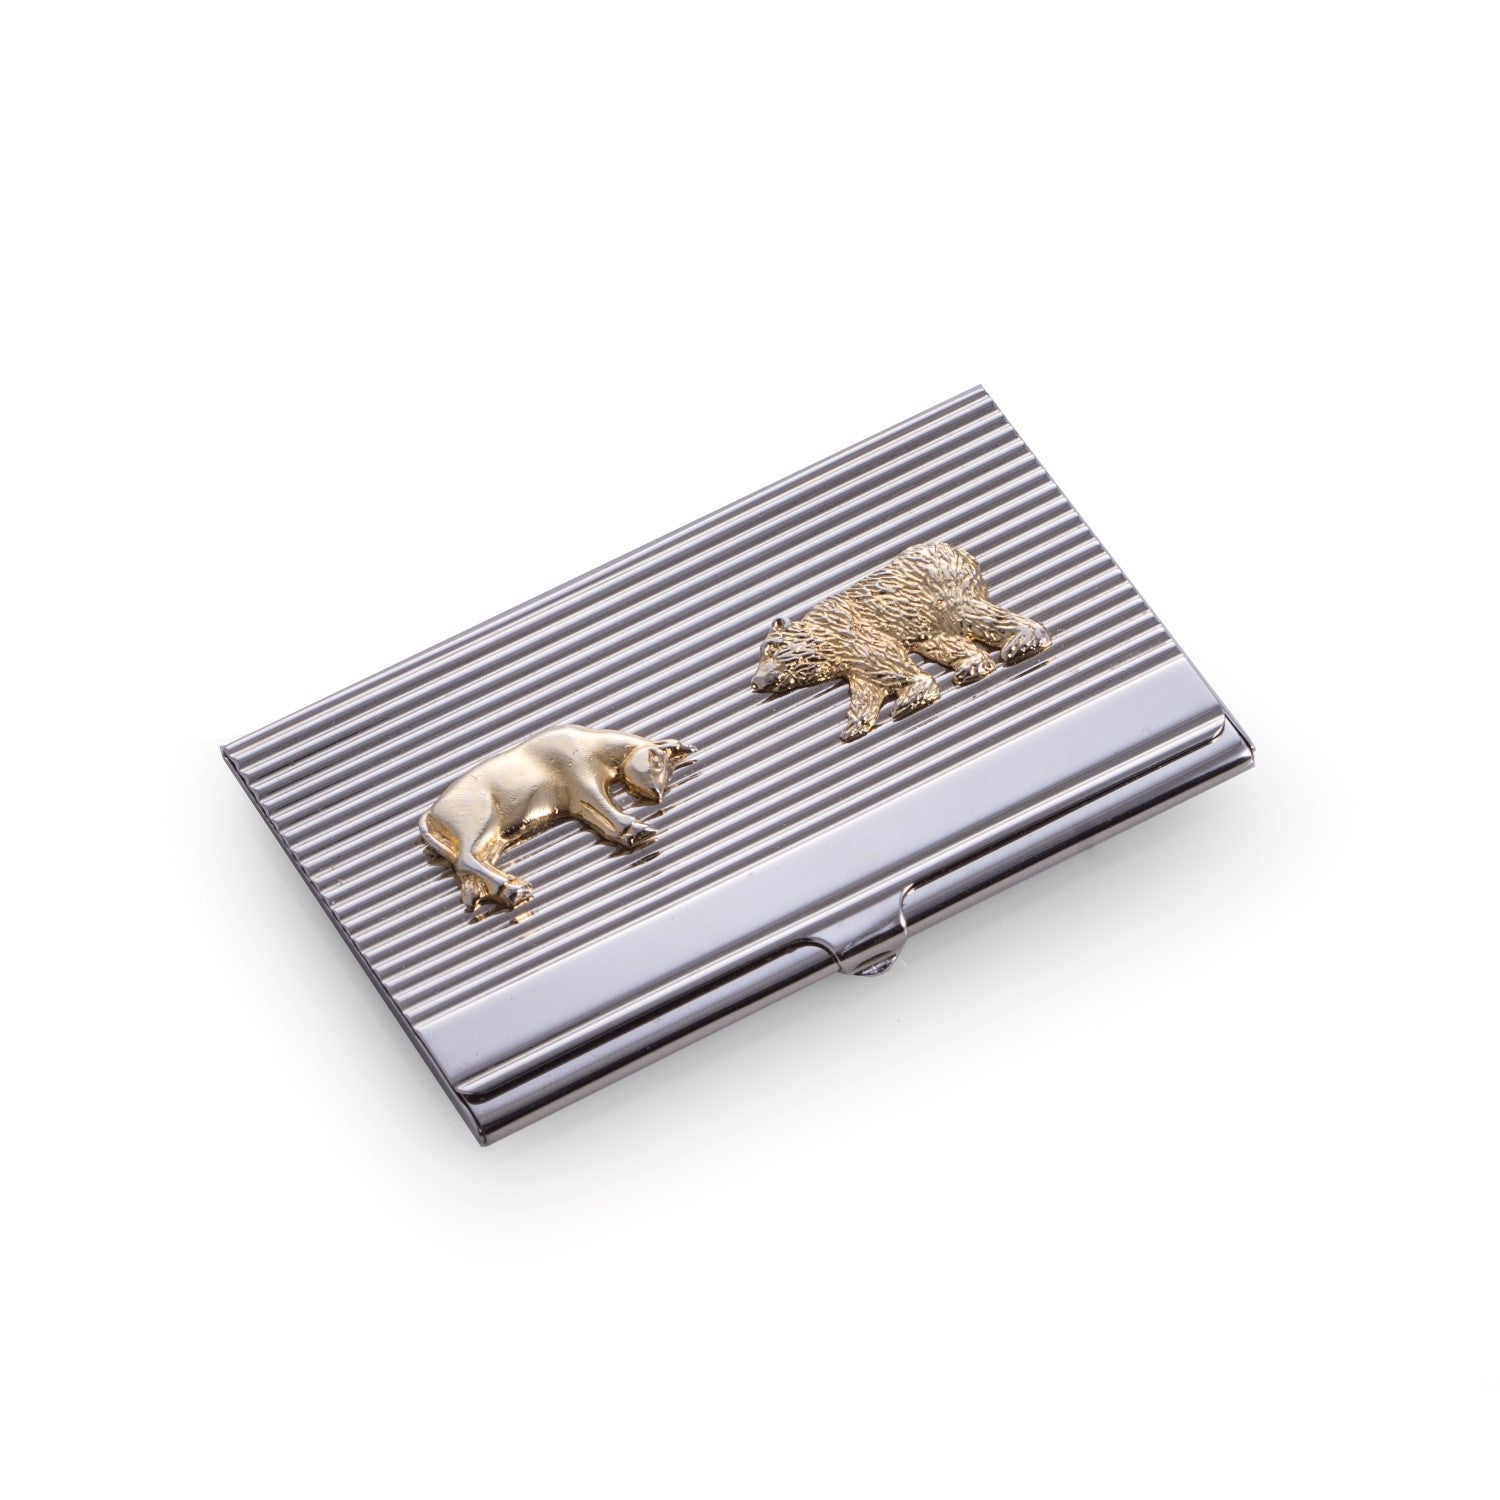 Wall Street Bull and Bear Business Card Holder - Silver Plated - Wall Street Treasures